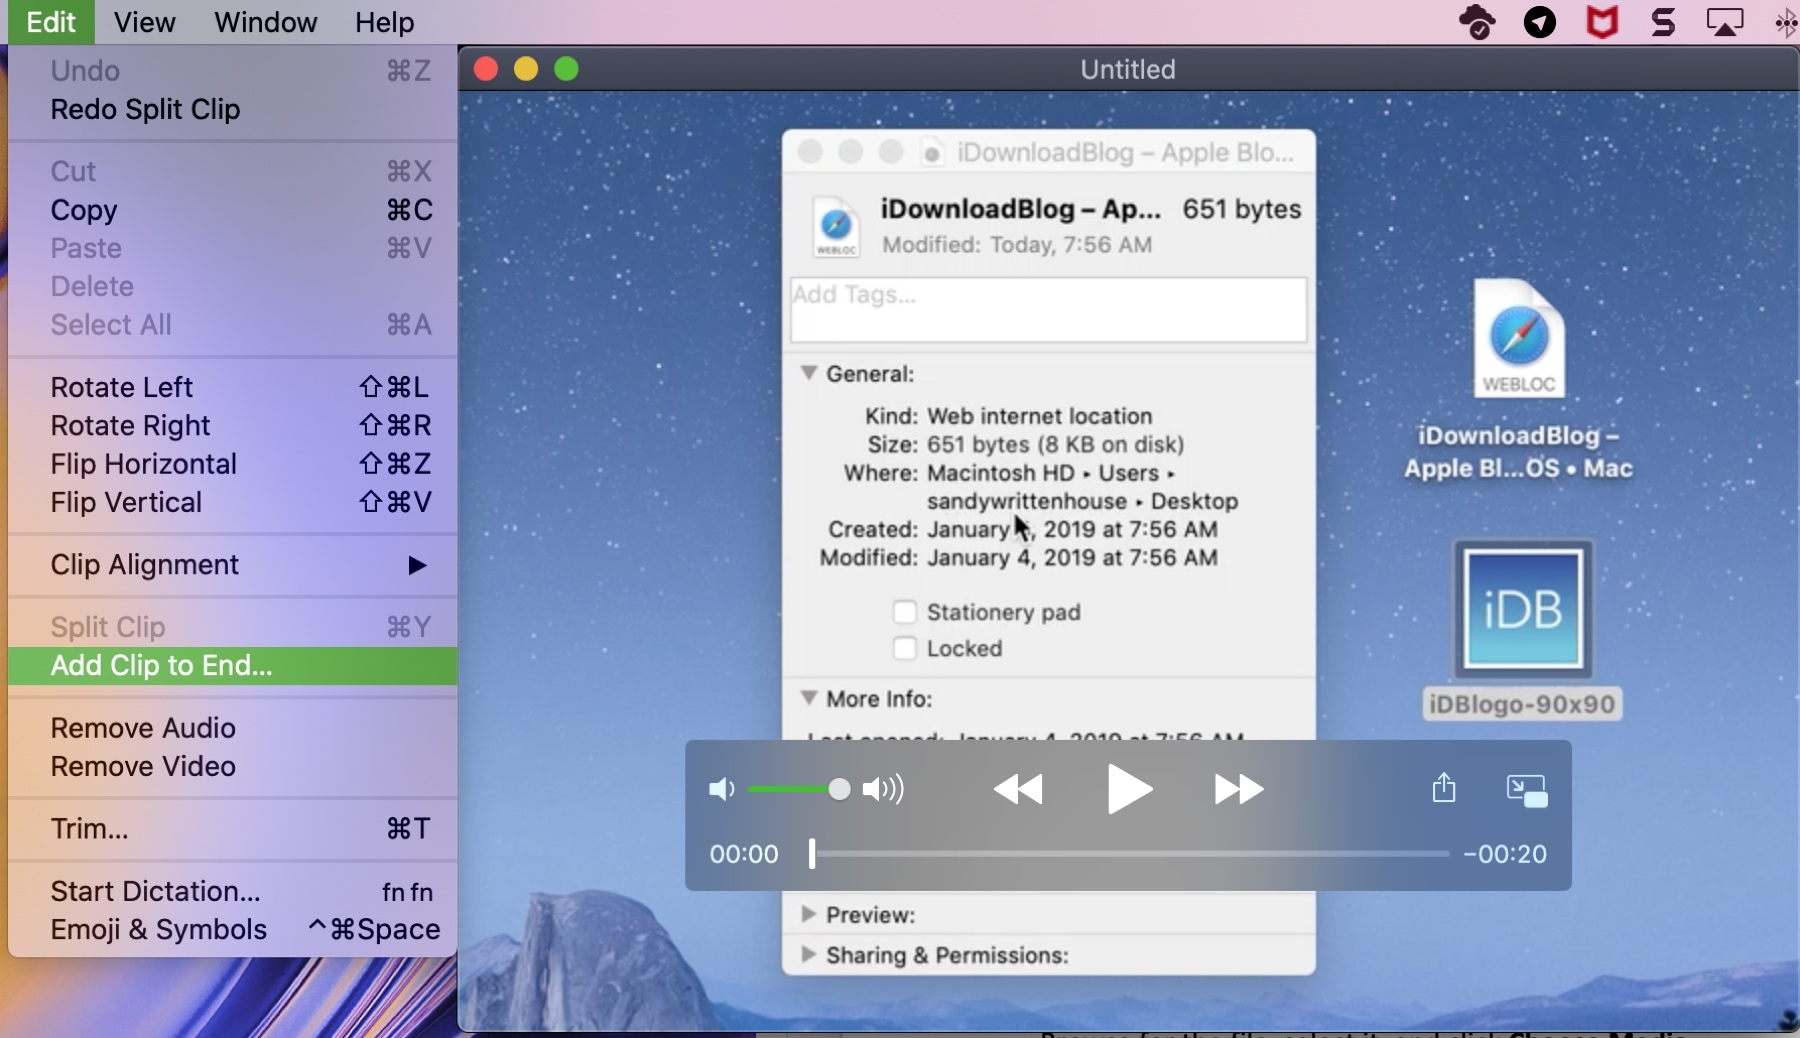 quicktime dvd player for mac free download